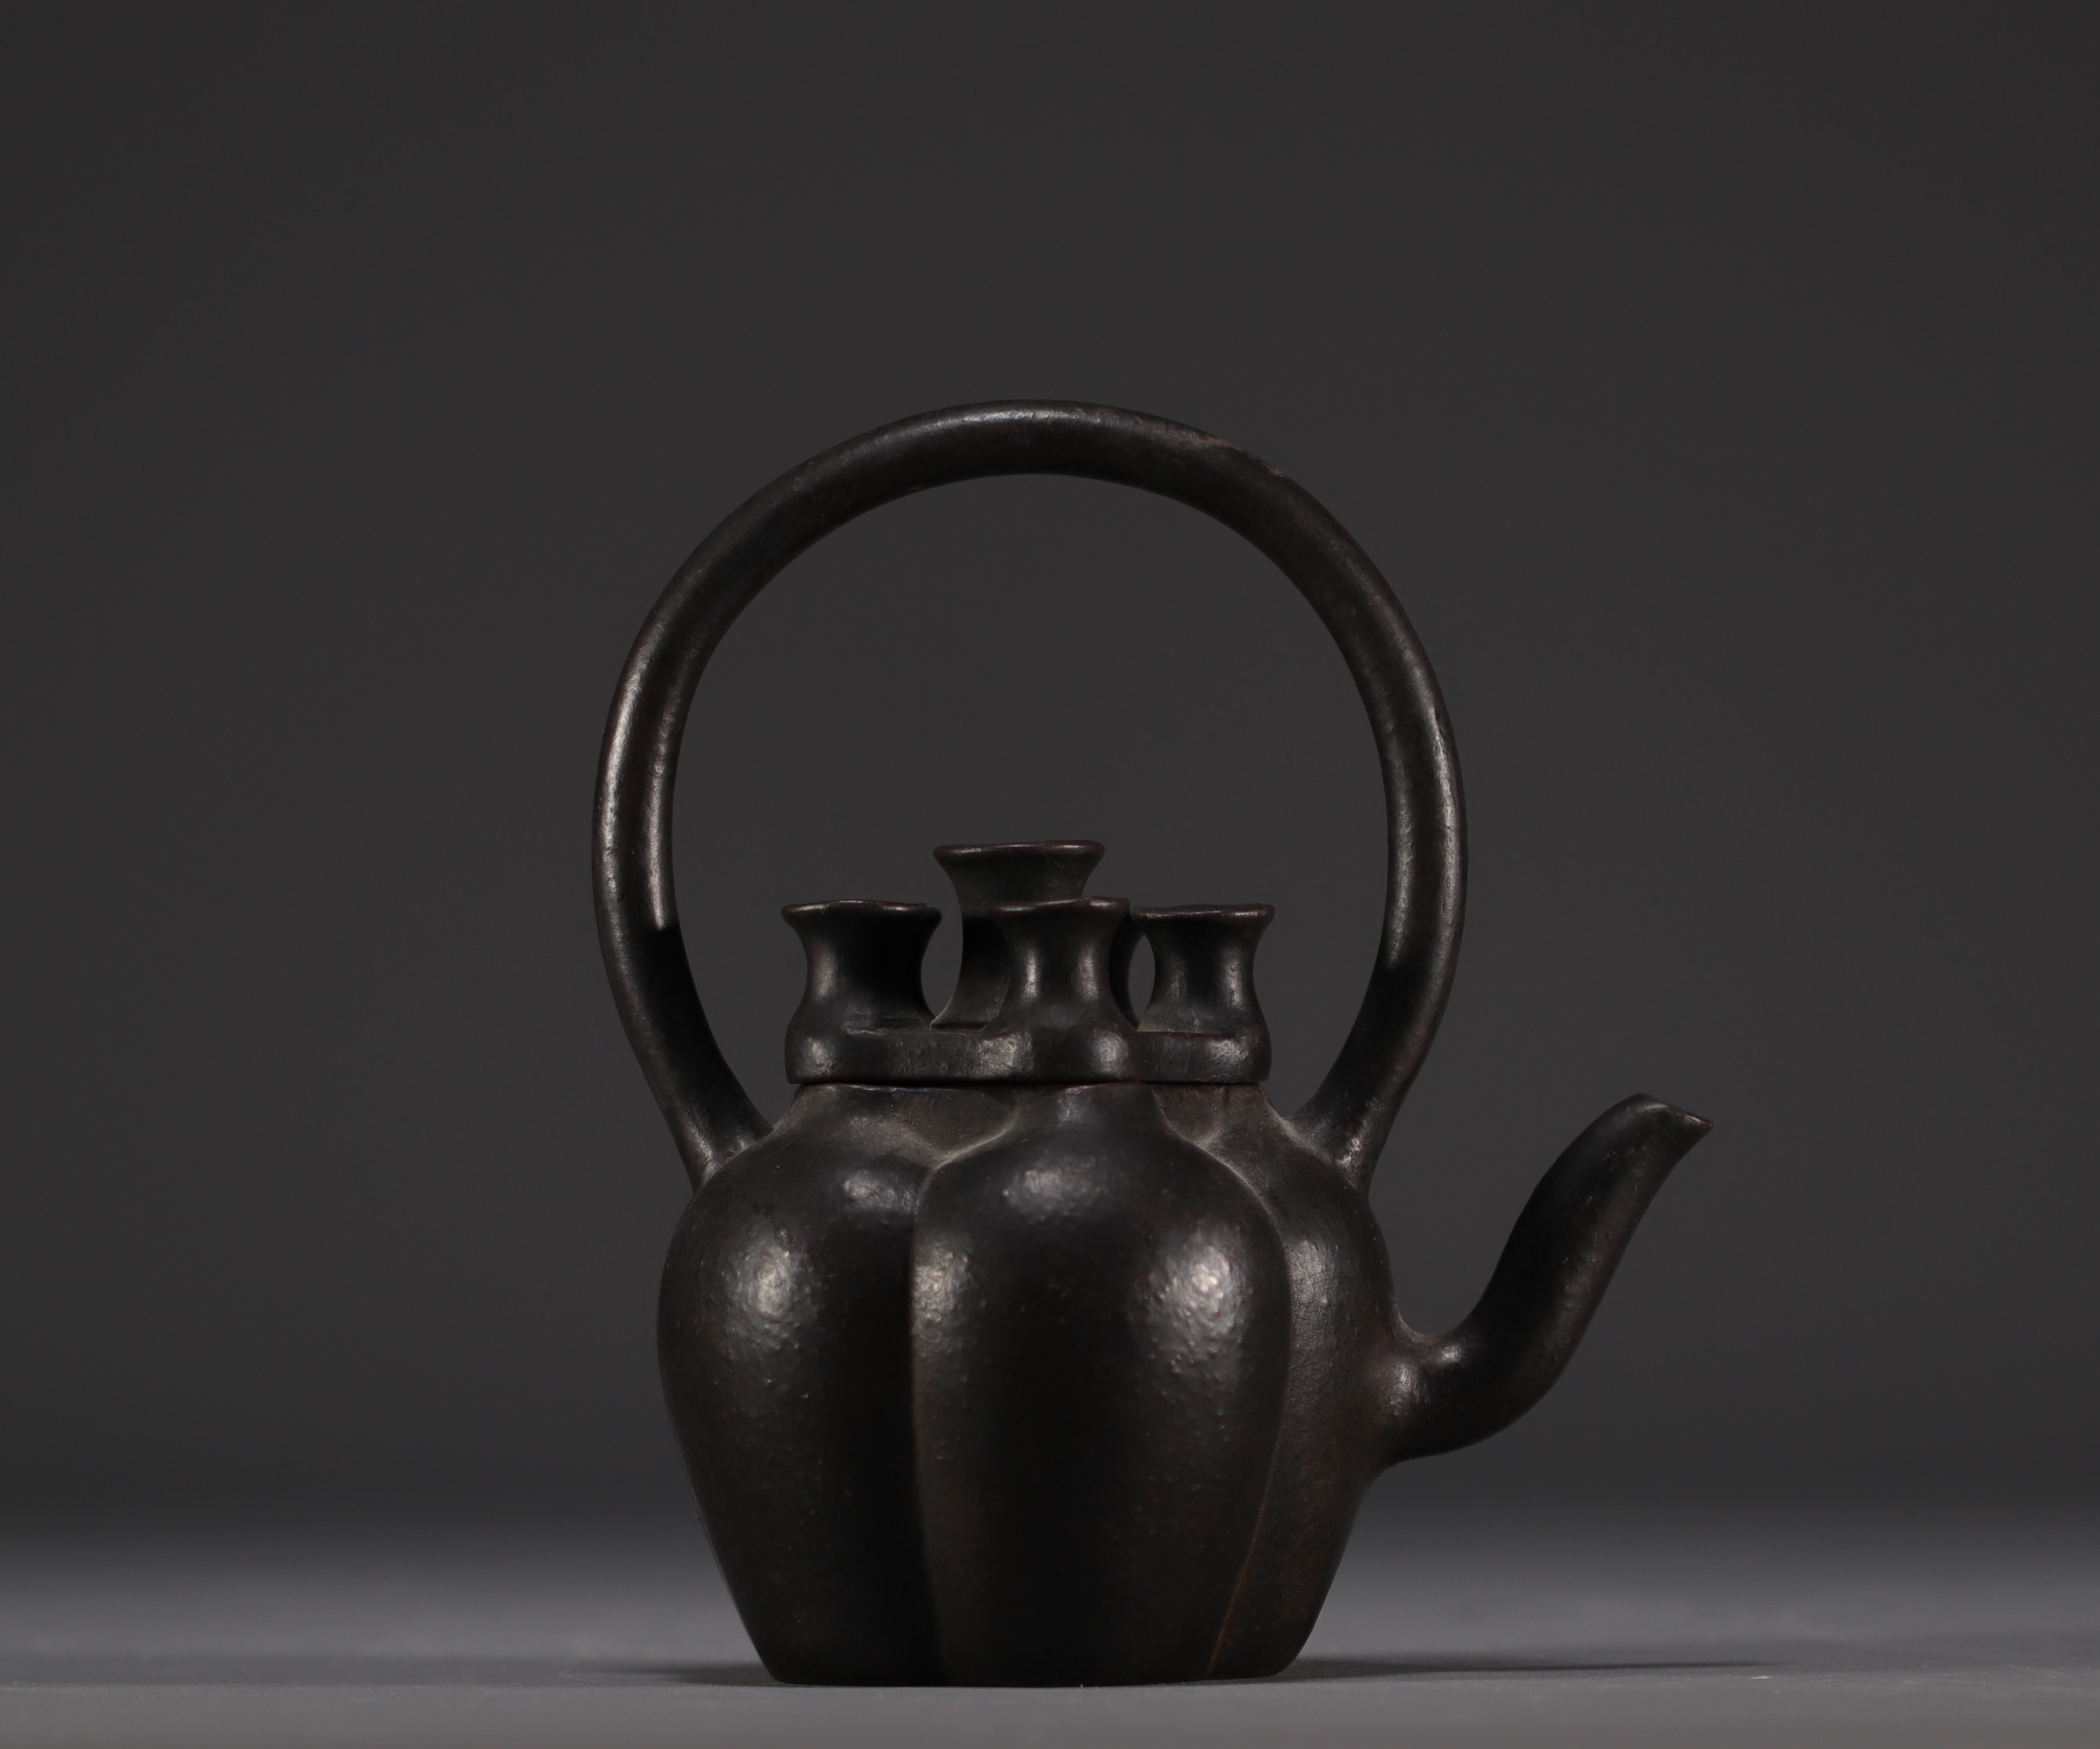 China - Cast iron teapot, calligraphic poem, Ming mark under the piece. - Image 4 of 6